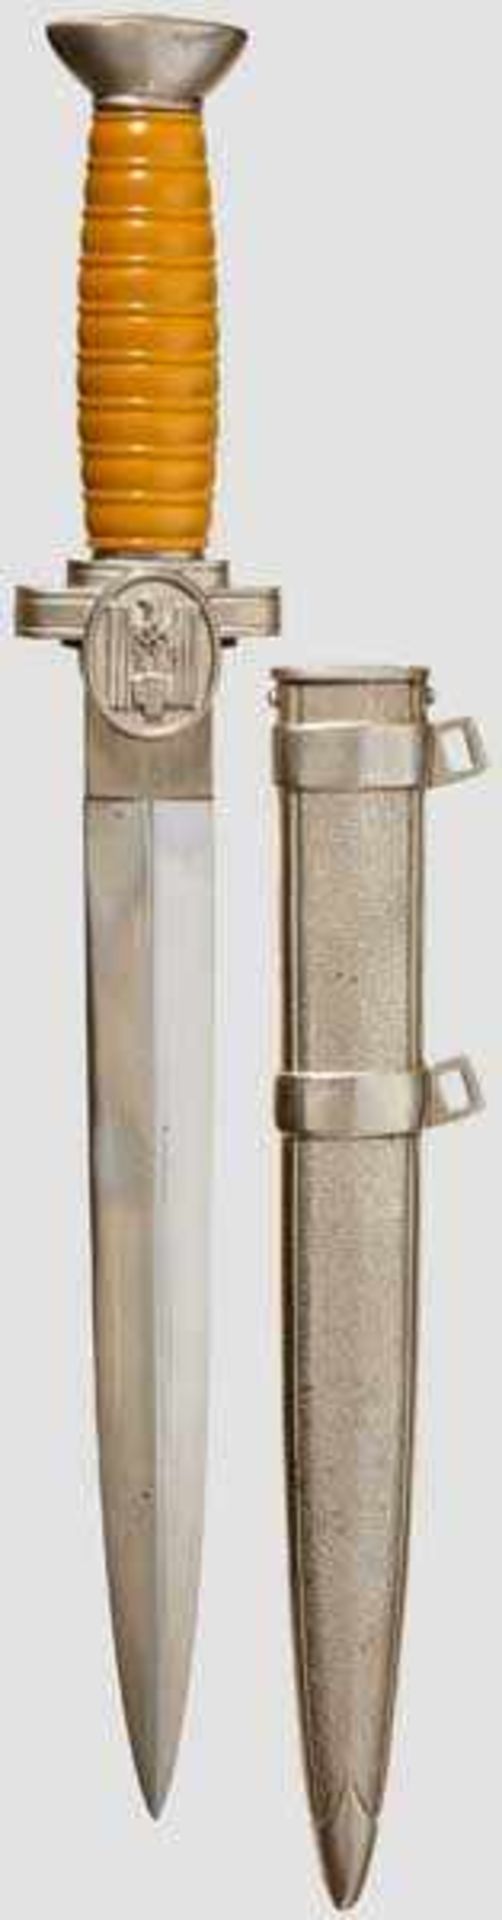 A Model 1938 Dagger for Leaders of the German Red Cross Unmarked polished blade. Nickel-plated